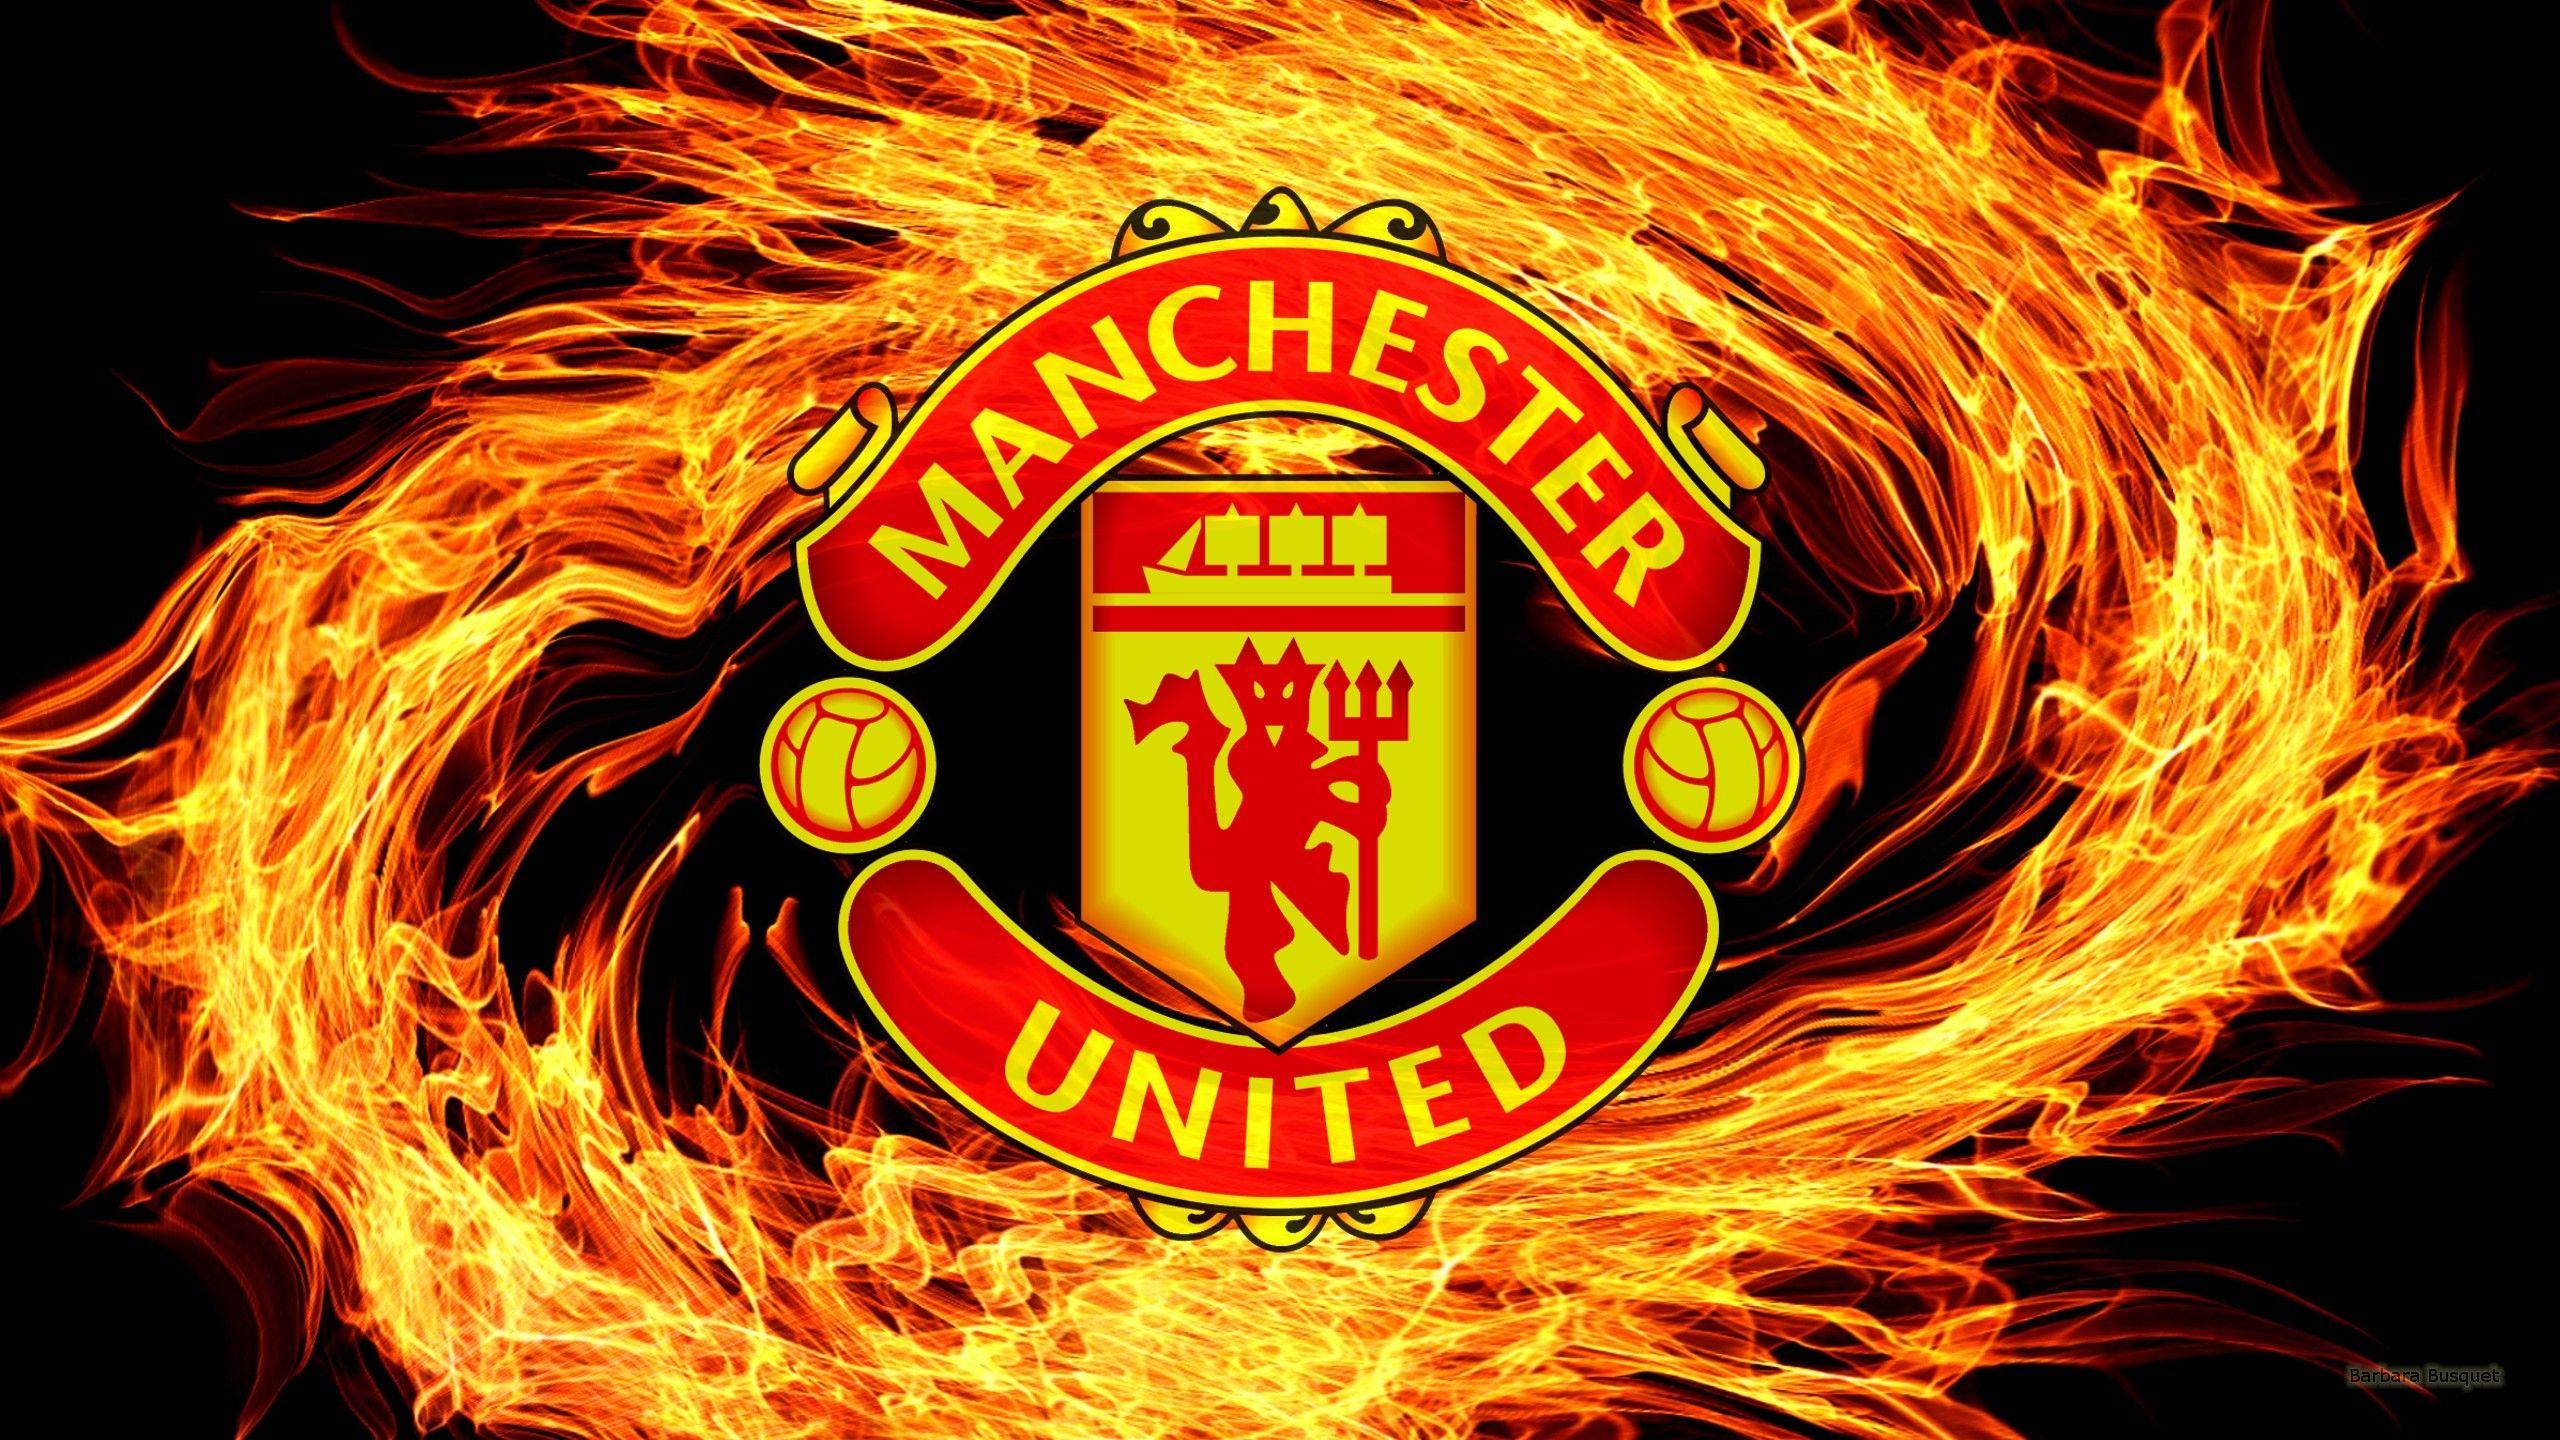 Manchester United Wallpaper 4K / Manchester United Logo Wallpapers On ...